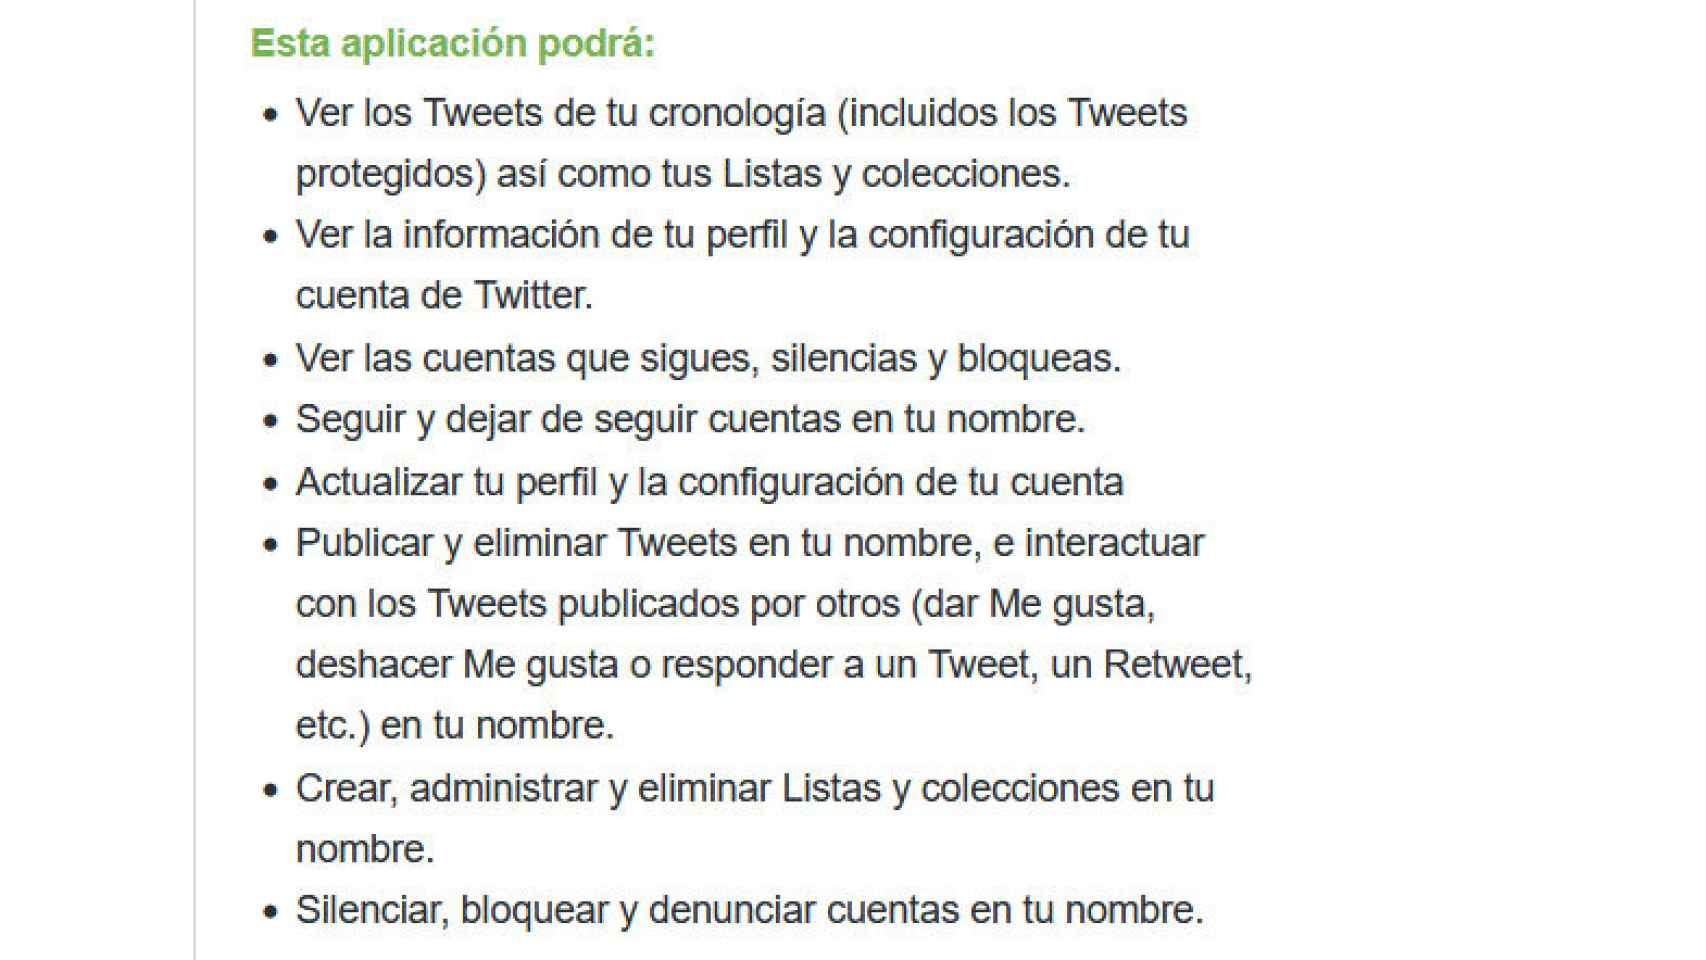 List of permissions requested by the application that calculates the value of the Twitter account